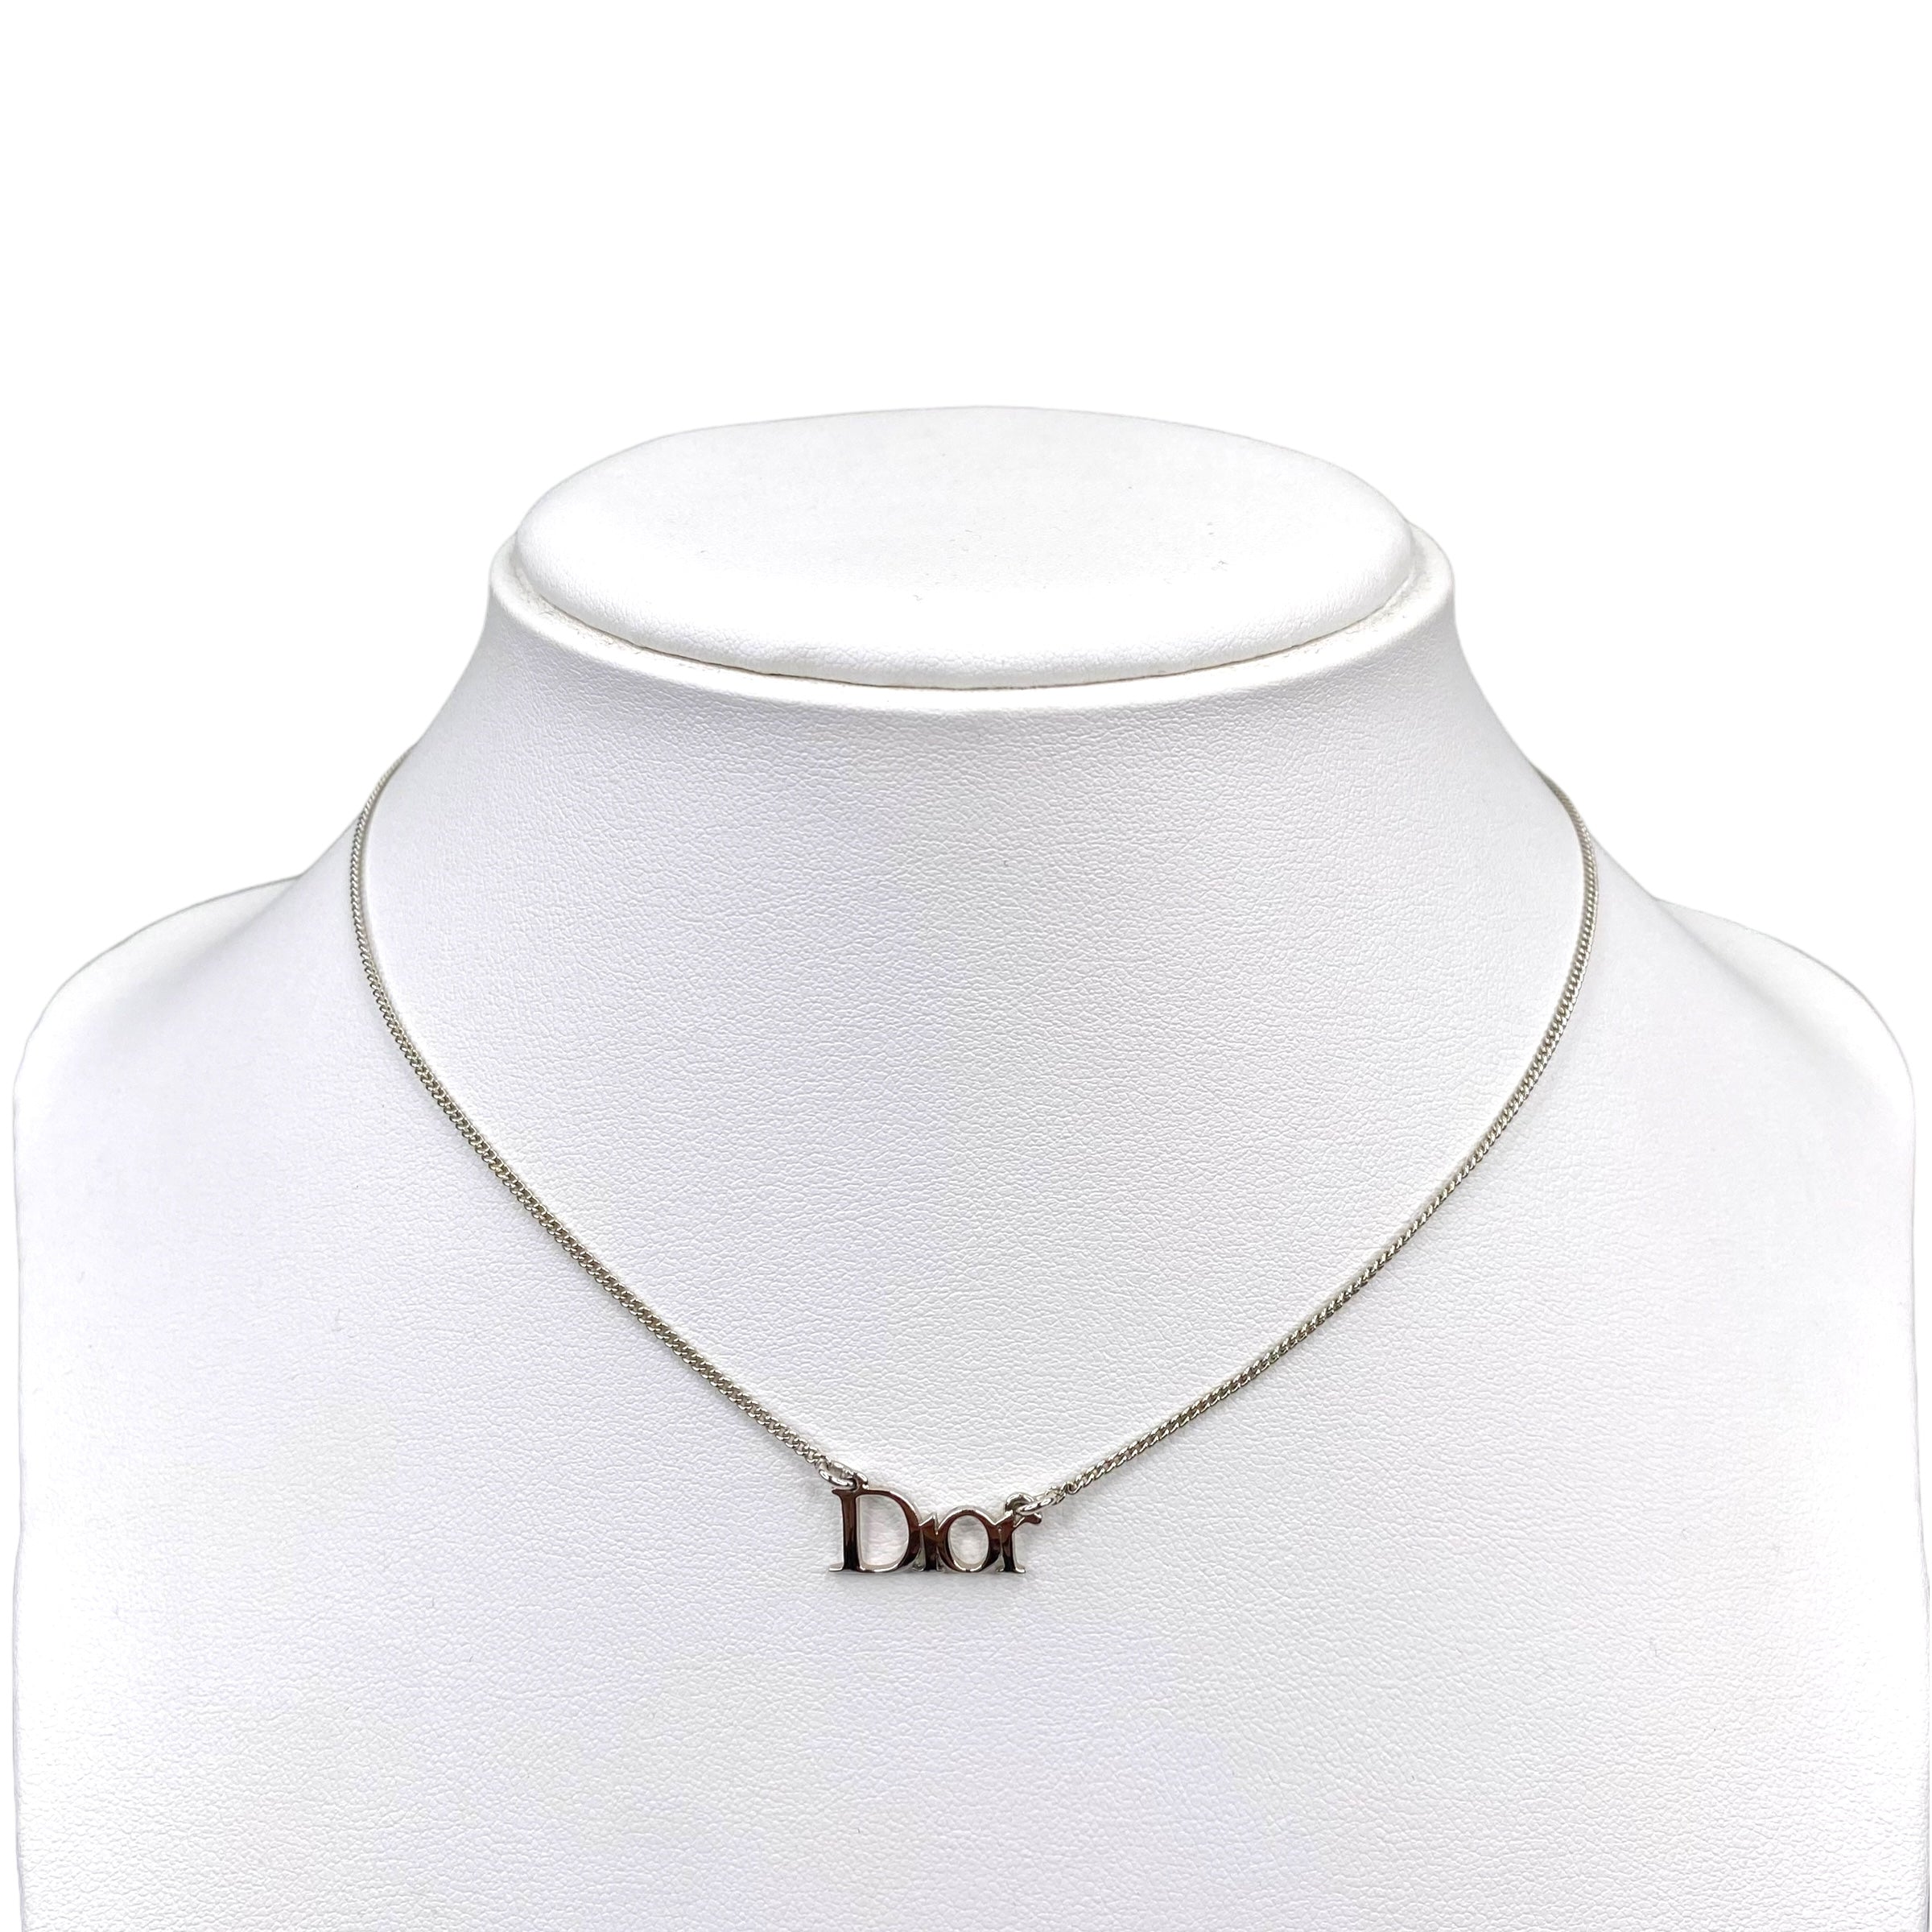 DIOR SPELLOUT PENDANT SILVER PLATED NECKLACE